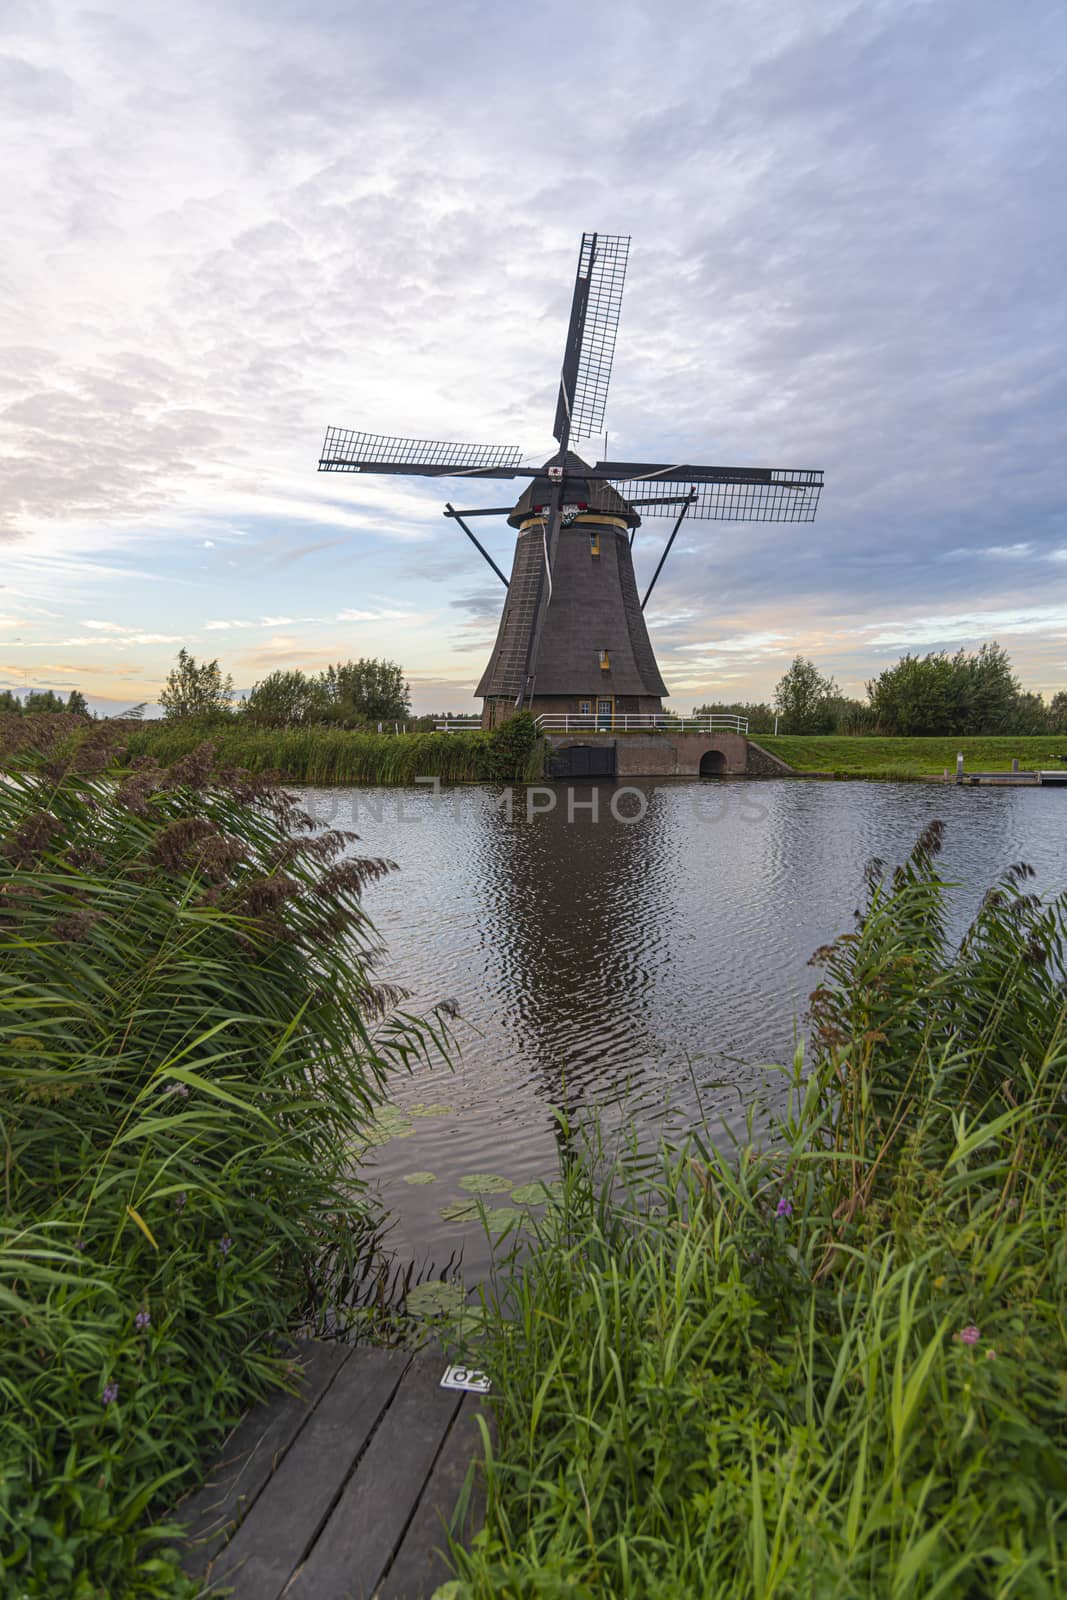 Dutch windmill laying along the canal with wild grass blown by strong winds at the early sunset moment by ankorlight